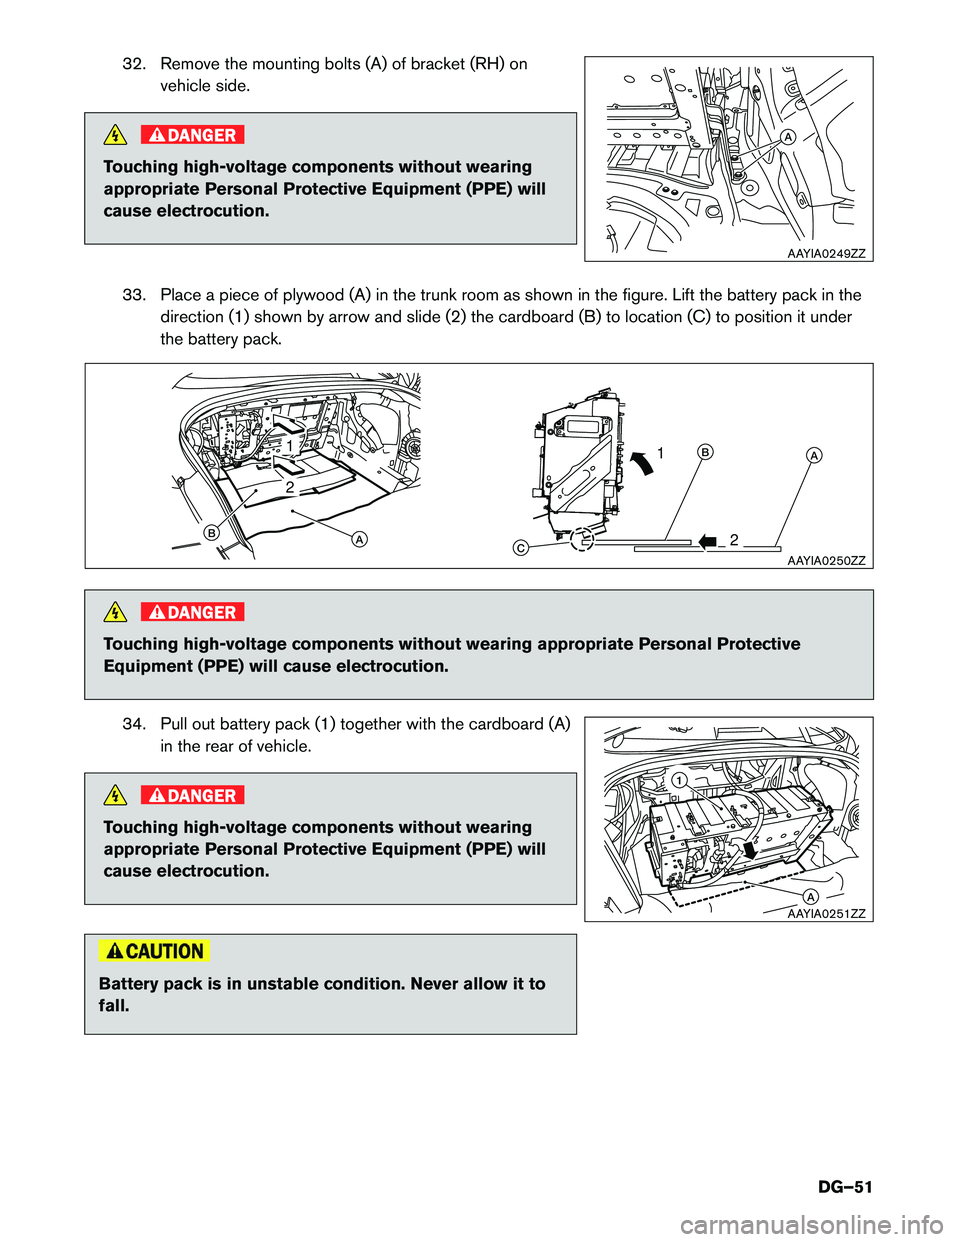 INFINITI Q50 HYBRID 2016  Dismantling Guide 32. Remove the mounting bolts (A) of bracket (RH) on
vehicle side. DANGER
Touching high-voltage components without wearing
appropriate

Personal Protective Equipment (PPE) will
cause electrocution.
33